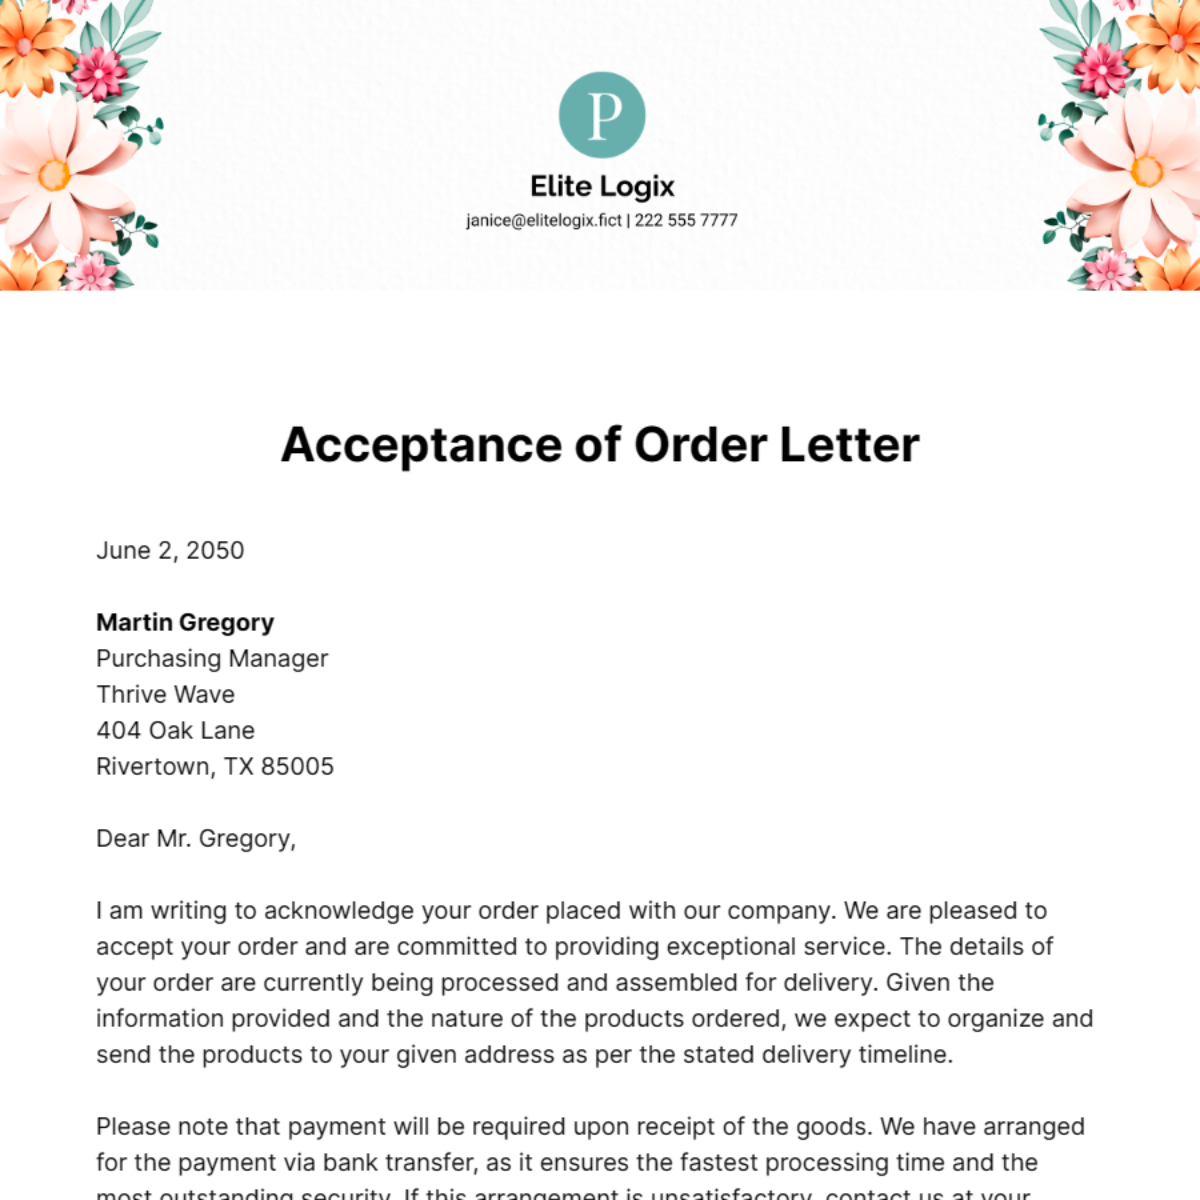 Free Acceptance of Order Letter Template